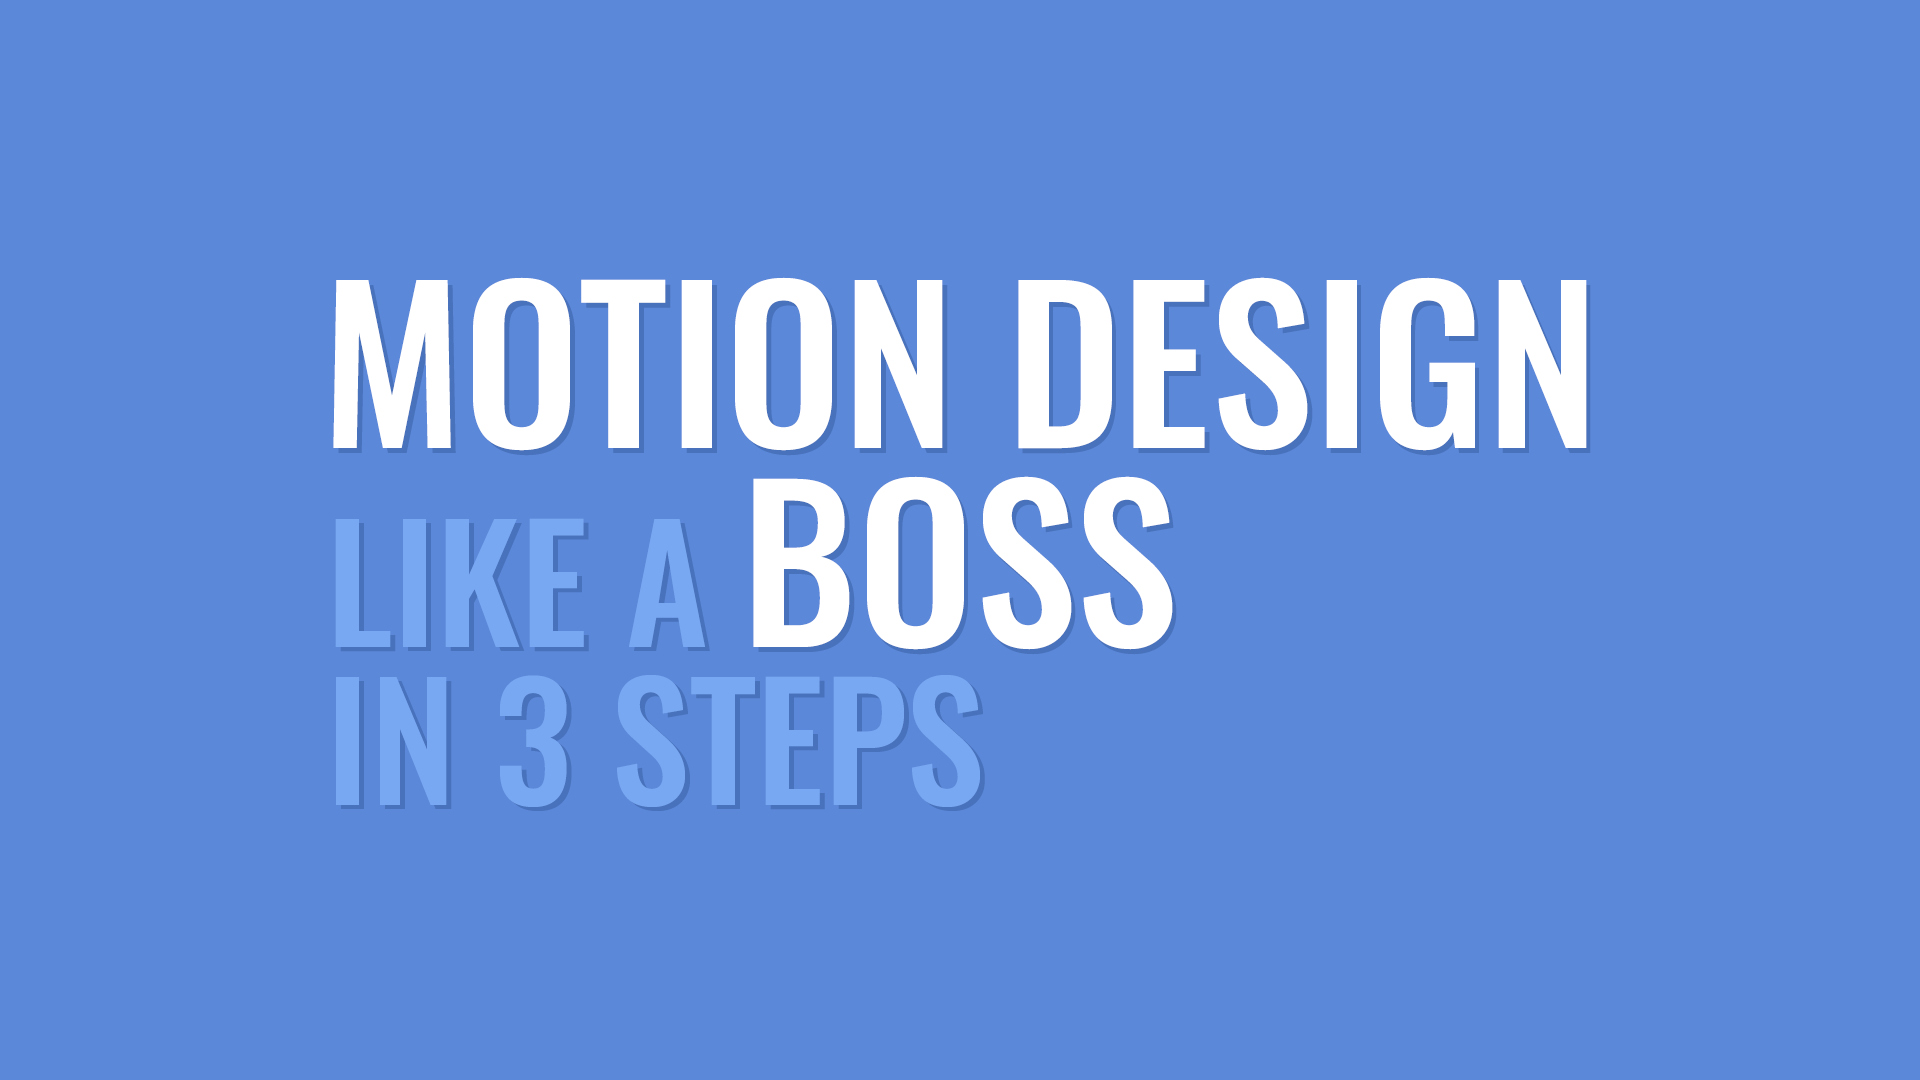 White and light blue writing on blue background: Motion Design Like a Boss in 3 Steps